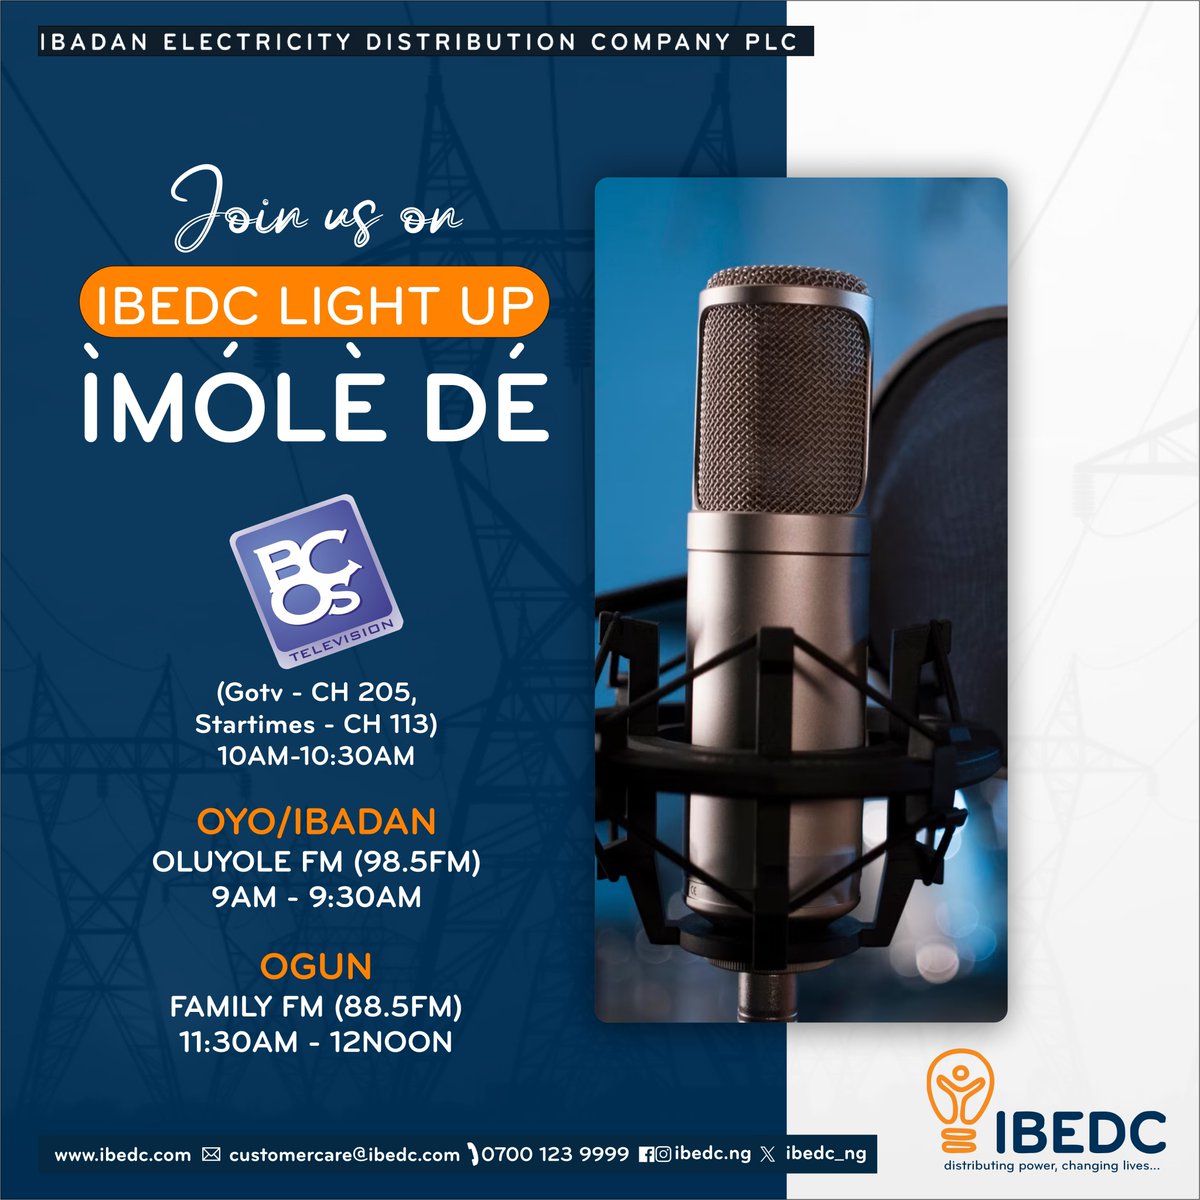 Join us on the following stations as we discuss the issues surrounding You and your electricity usage. Feel free to call 📷 in the programmes or send us a DM 📷. #ibedc #imolede #ibedclightup #ibadan #oyo #ogun #electricity #electricityuse #distributingpower #changinglives.